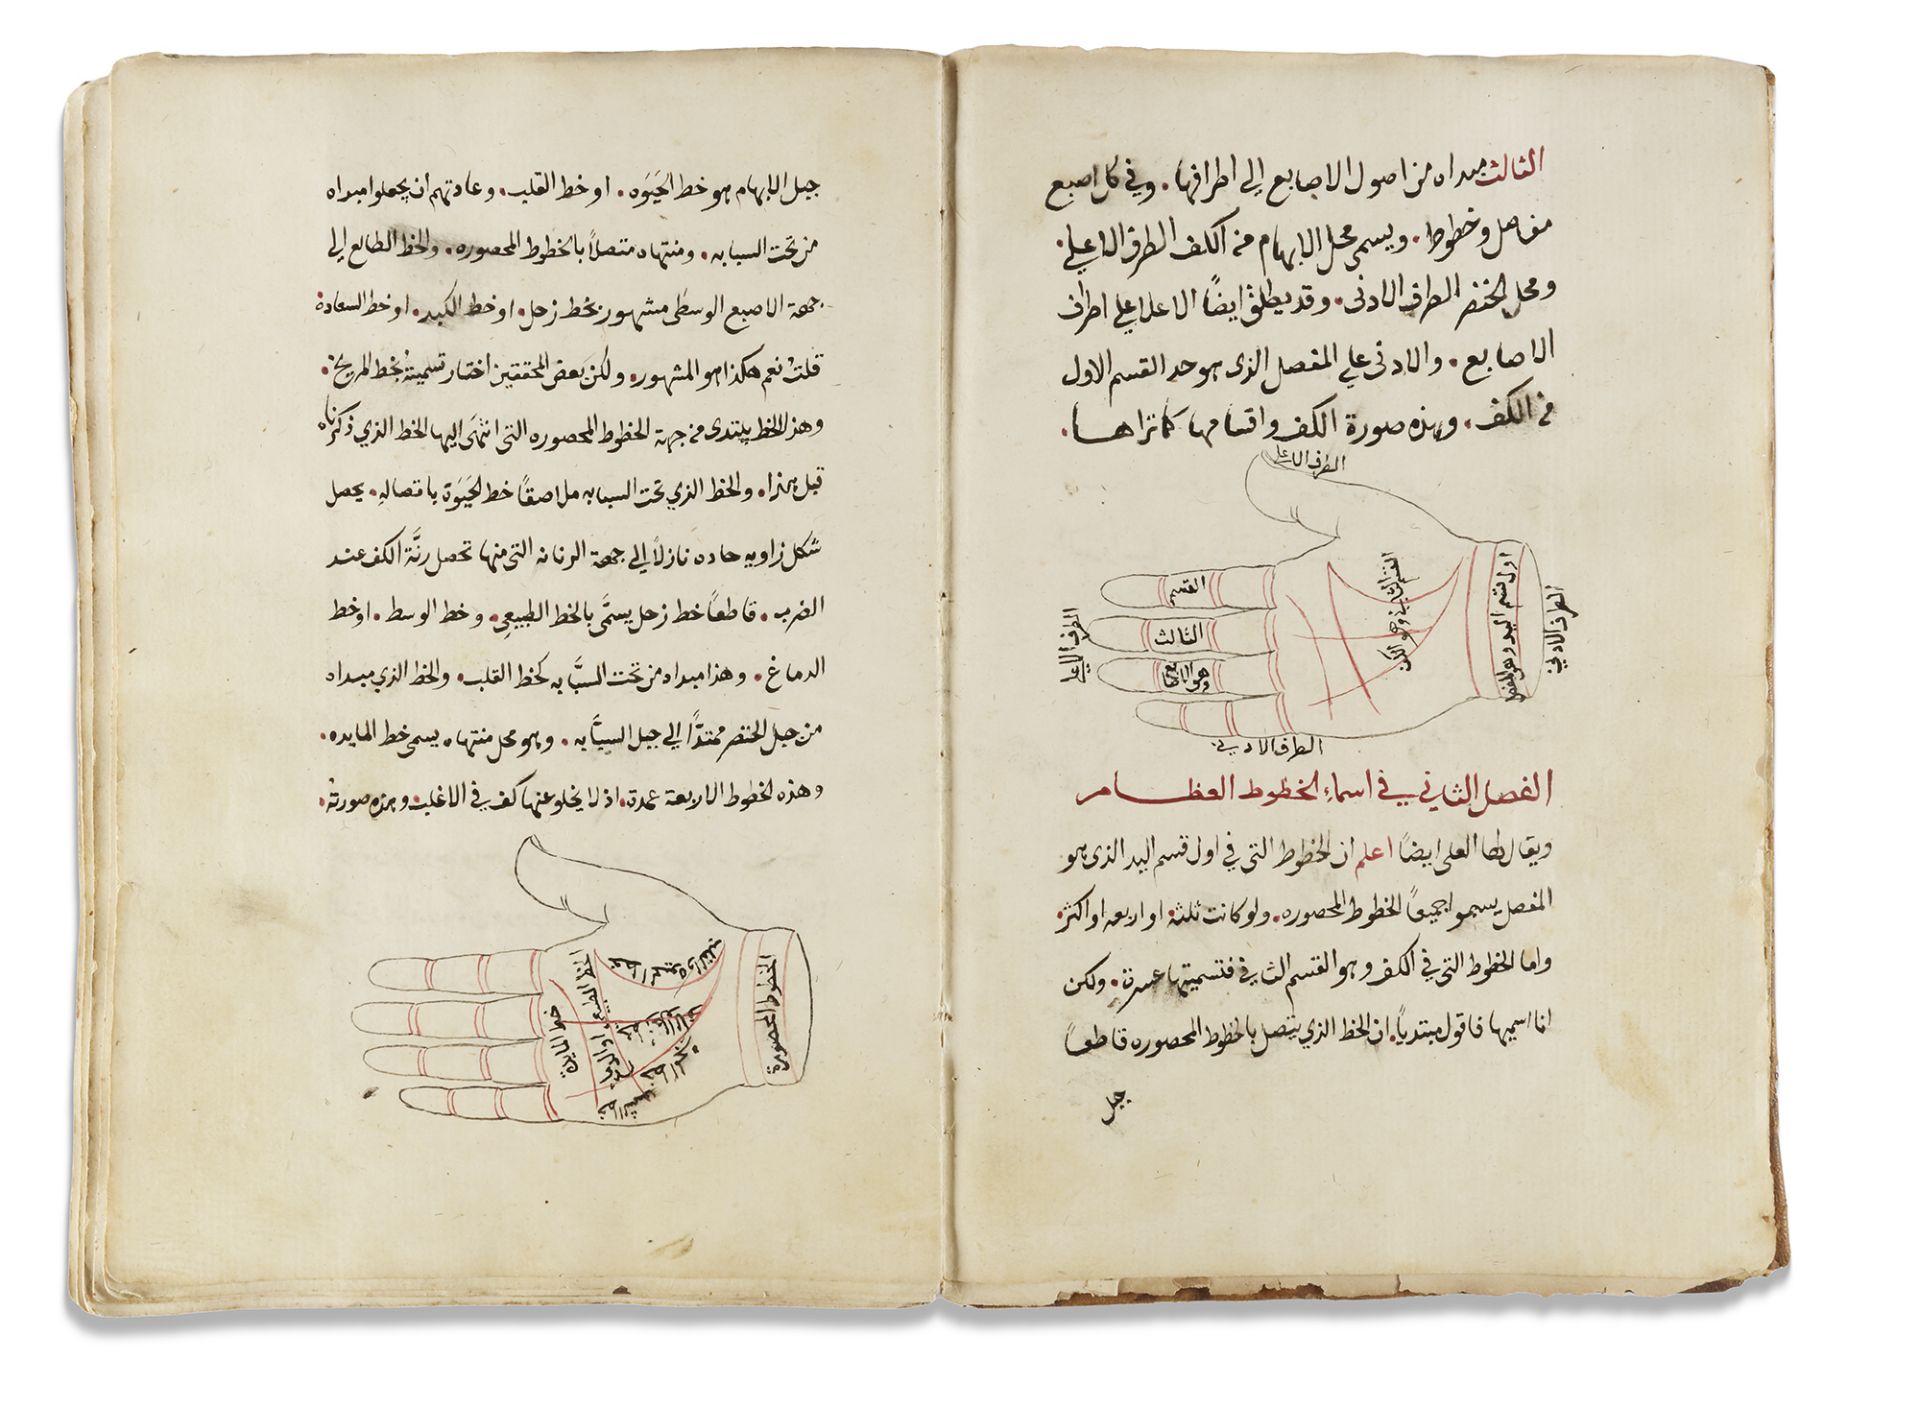 A BOOK IN PALMISTRY, WRITTEN ABOUT 1250 AH/1834 AD - Image 2 of 5